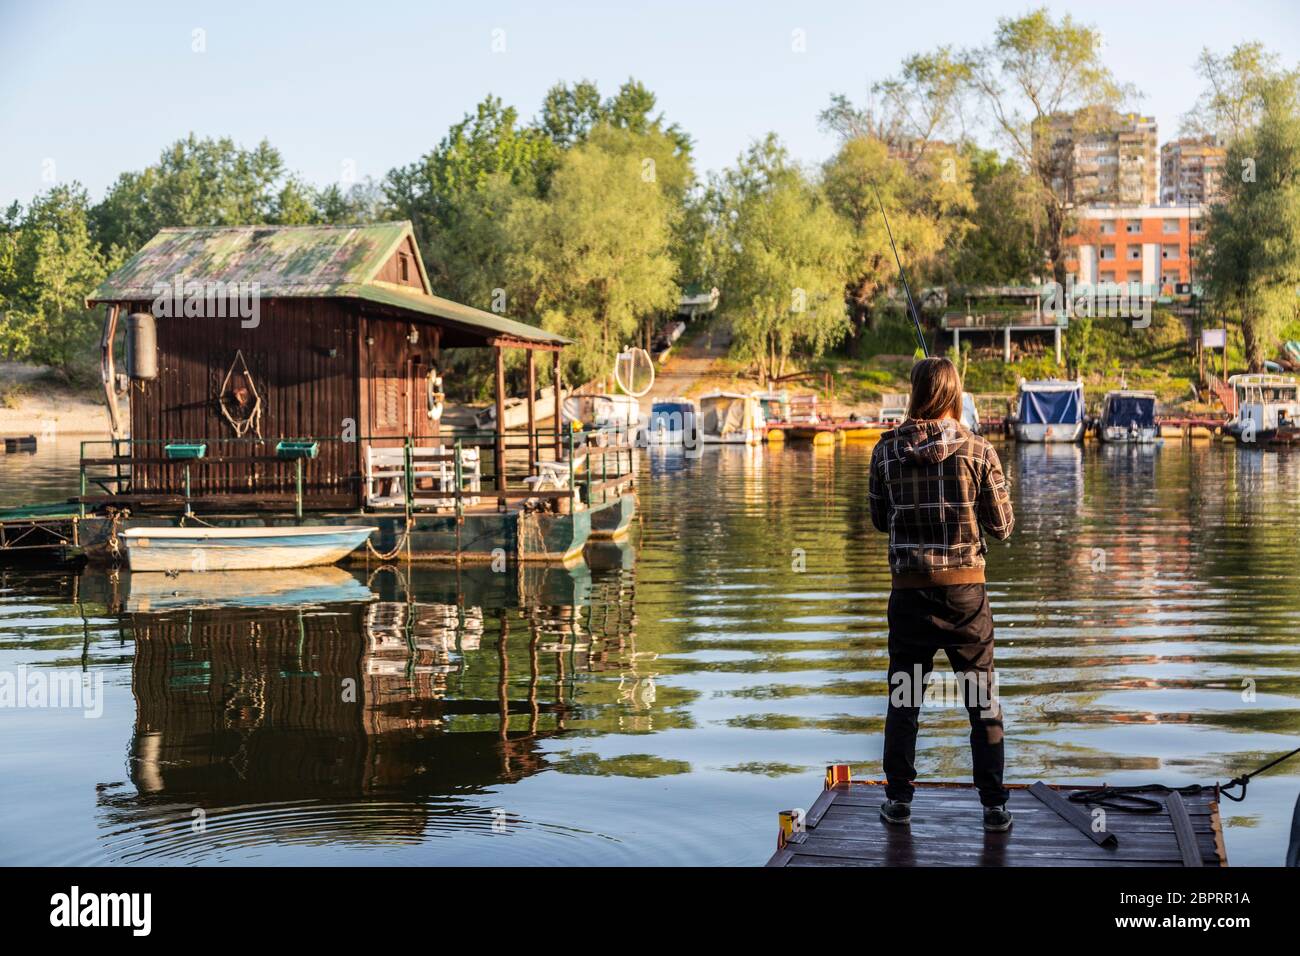 https://c8.alamy.com/comp/2BPRR1A/man-with-long-hair-is-fishing-at-river-corner-from-raft-boats-and-floating-houses-are-around-him-with-trees-in-background-he-is-using-fishing-rod-wi-2BPRR1A.jpg